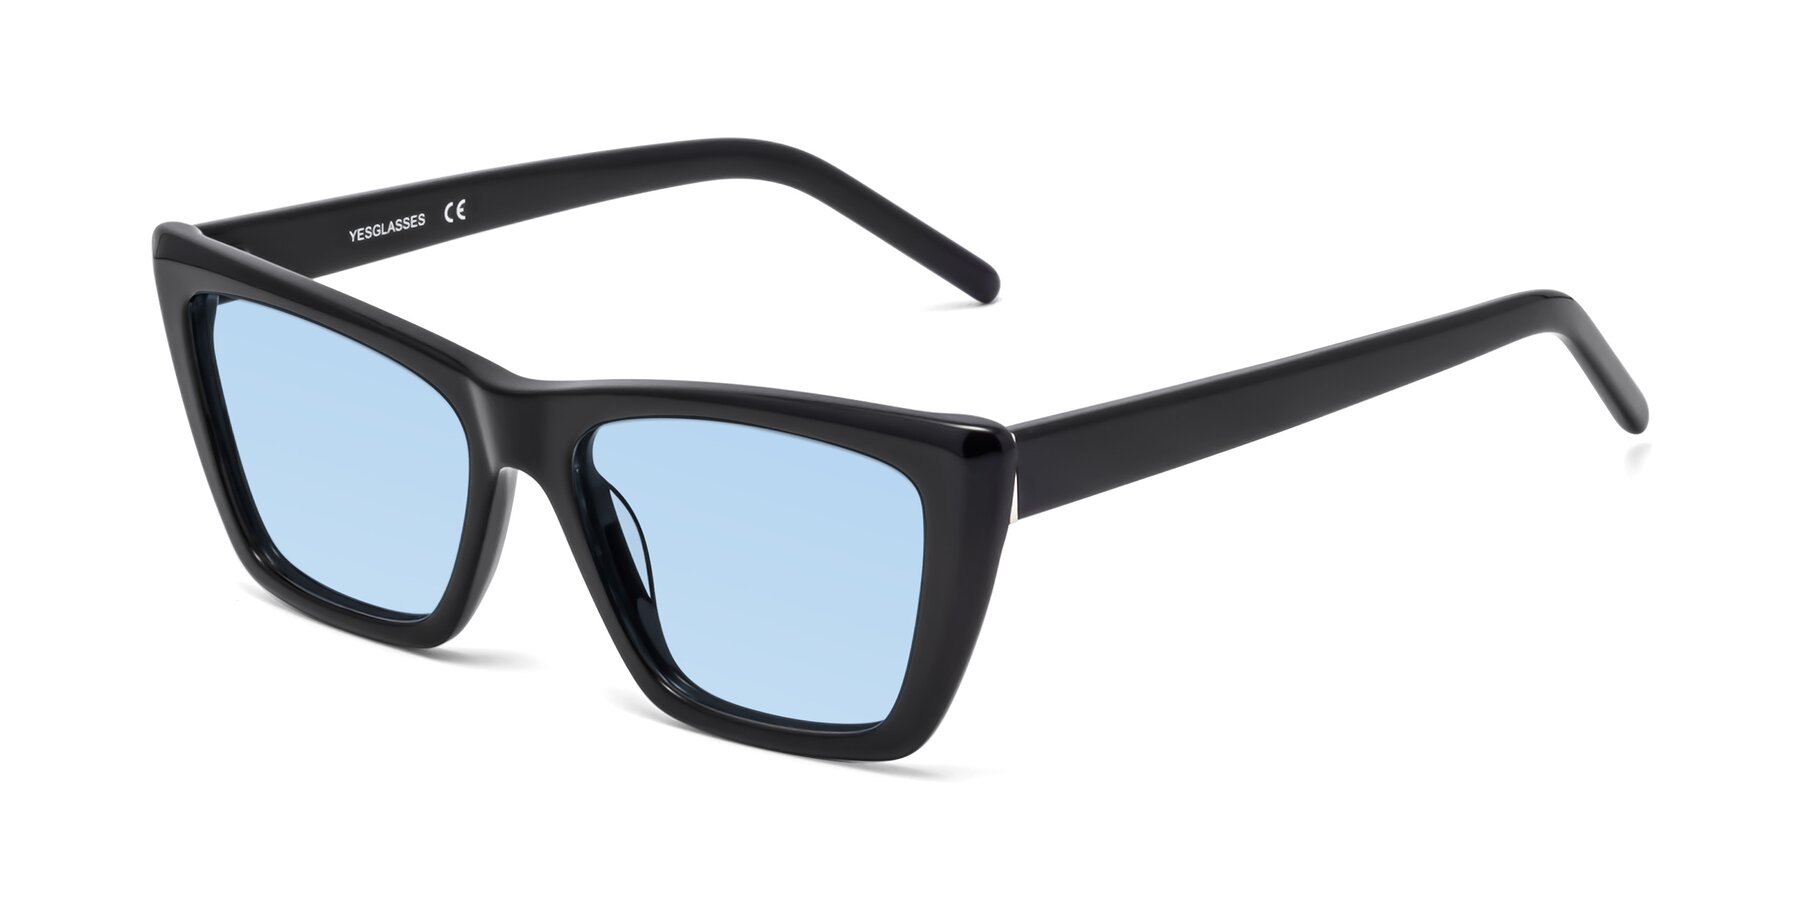 Angle of 1494 in Black with Light Blue Tinted Lenses